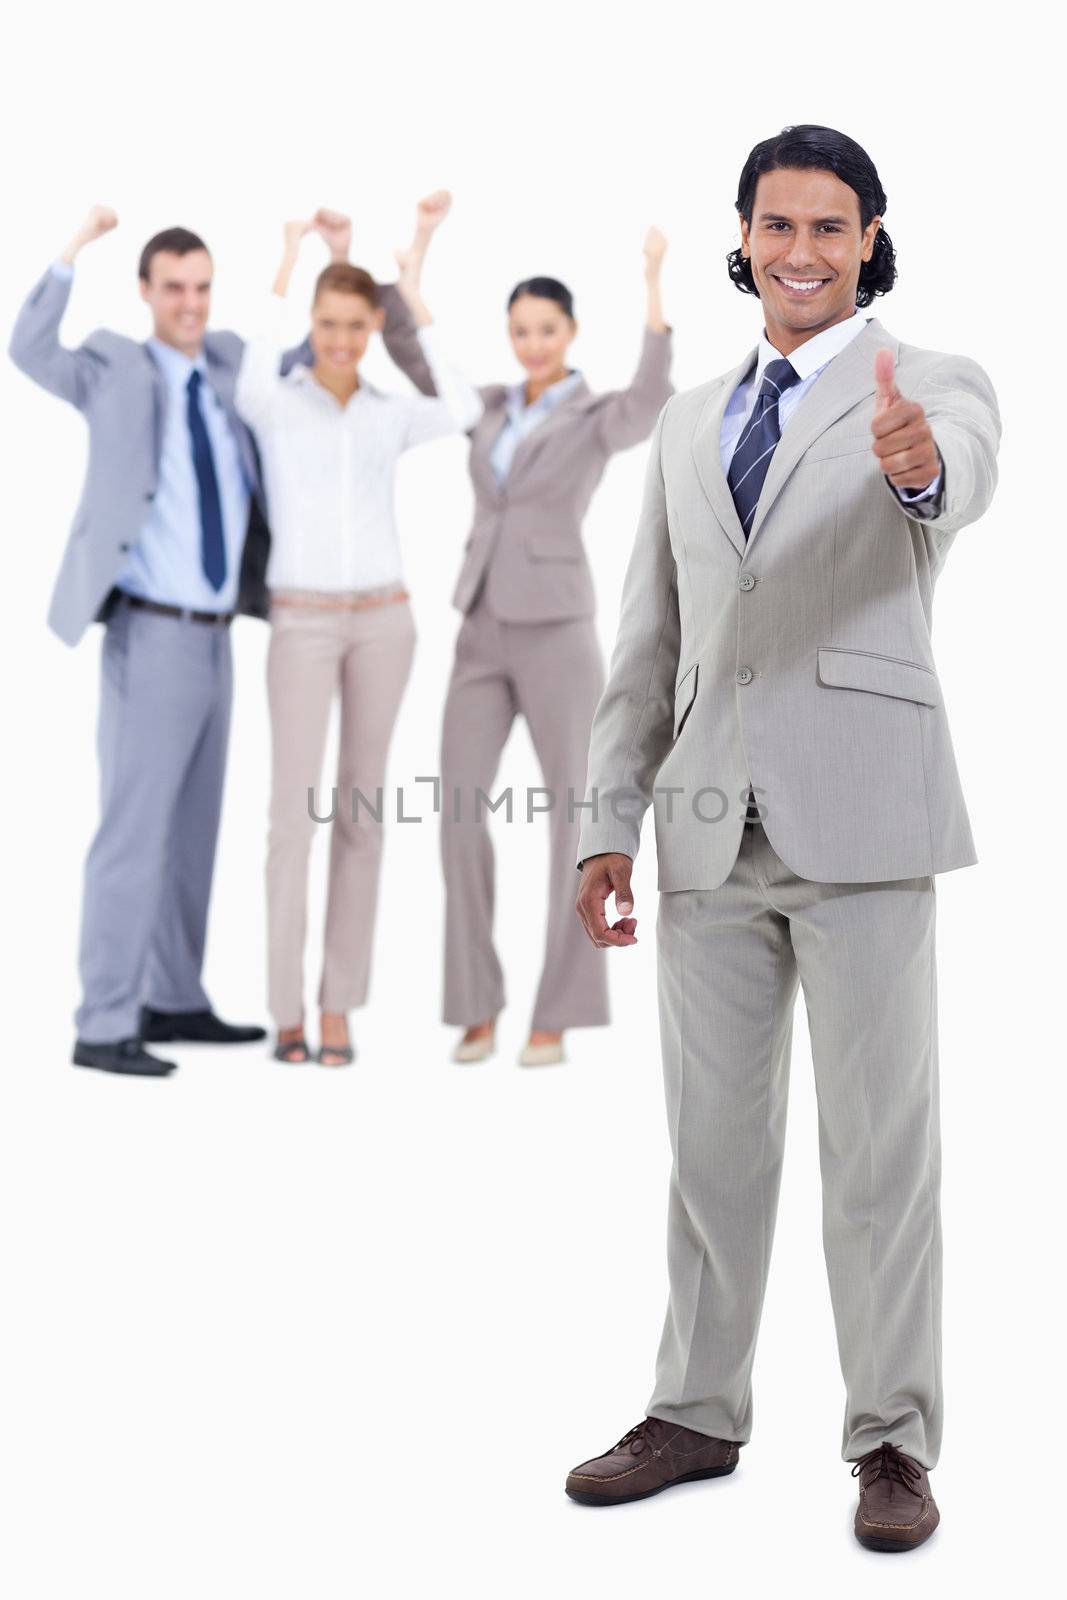 Businessman smiling with his thumbs up and cheering people behind him against white background